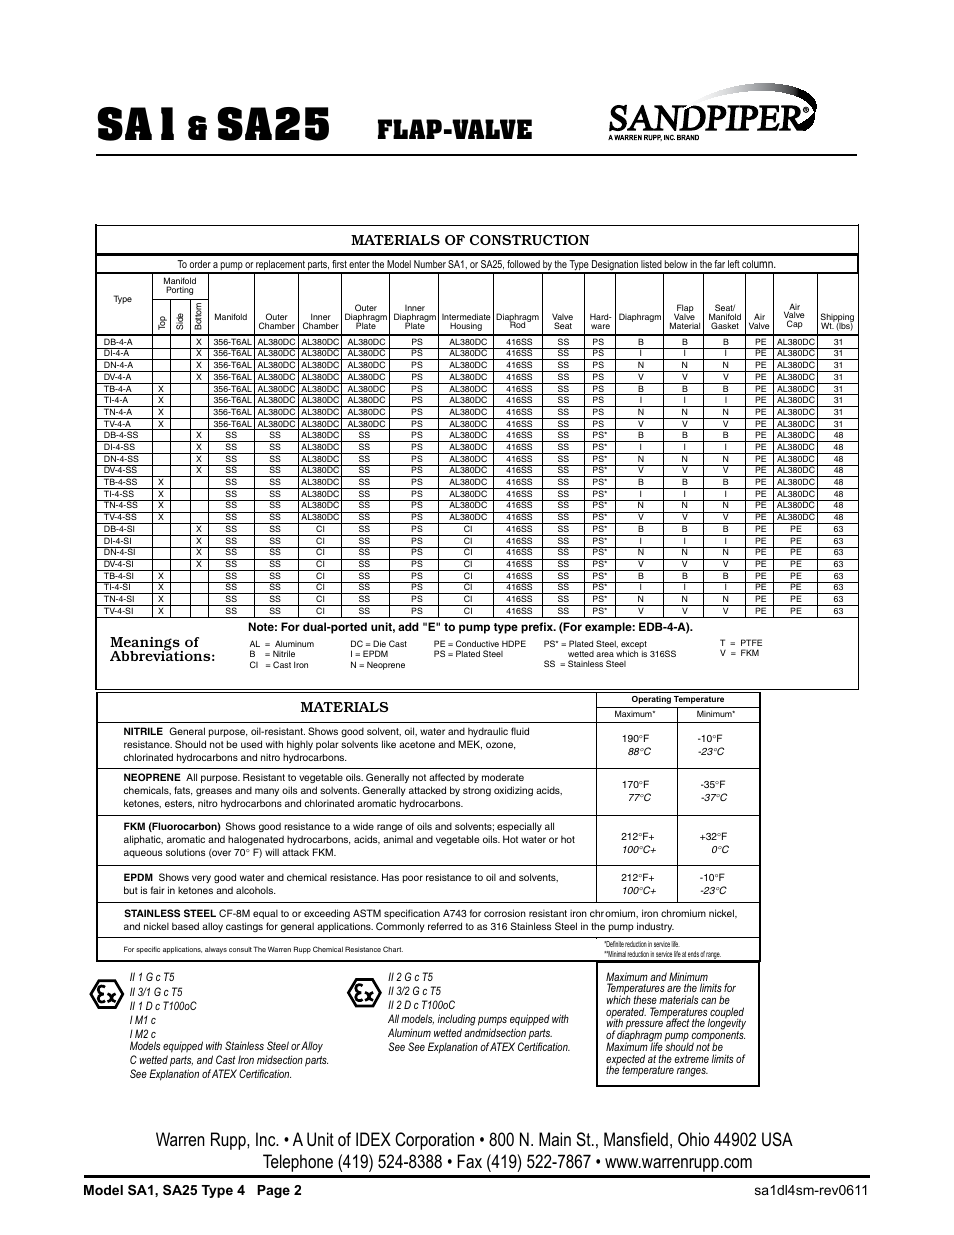 Sandpiper Chemical Resistance Chart